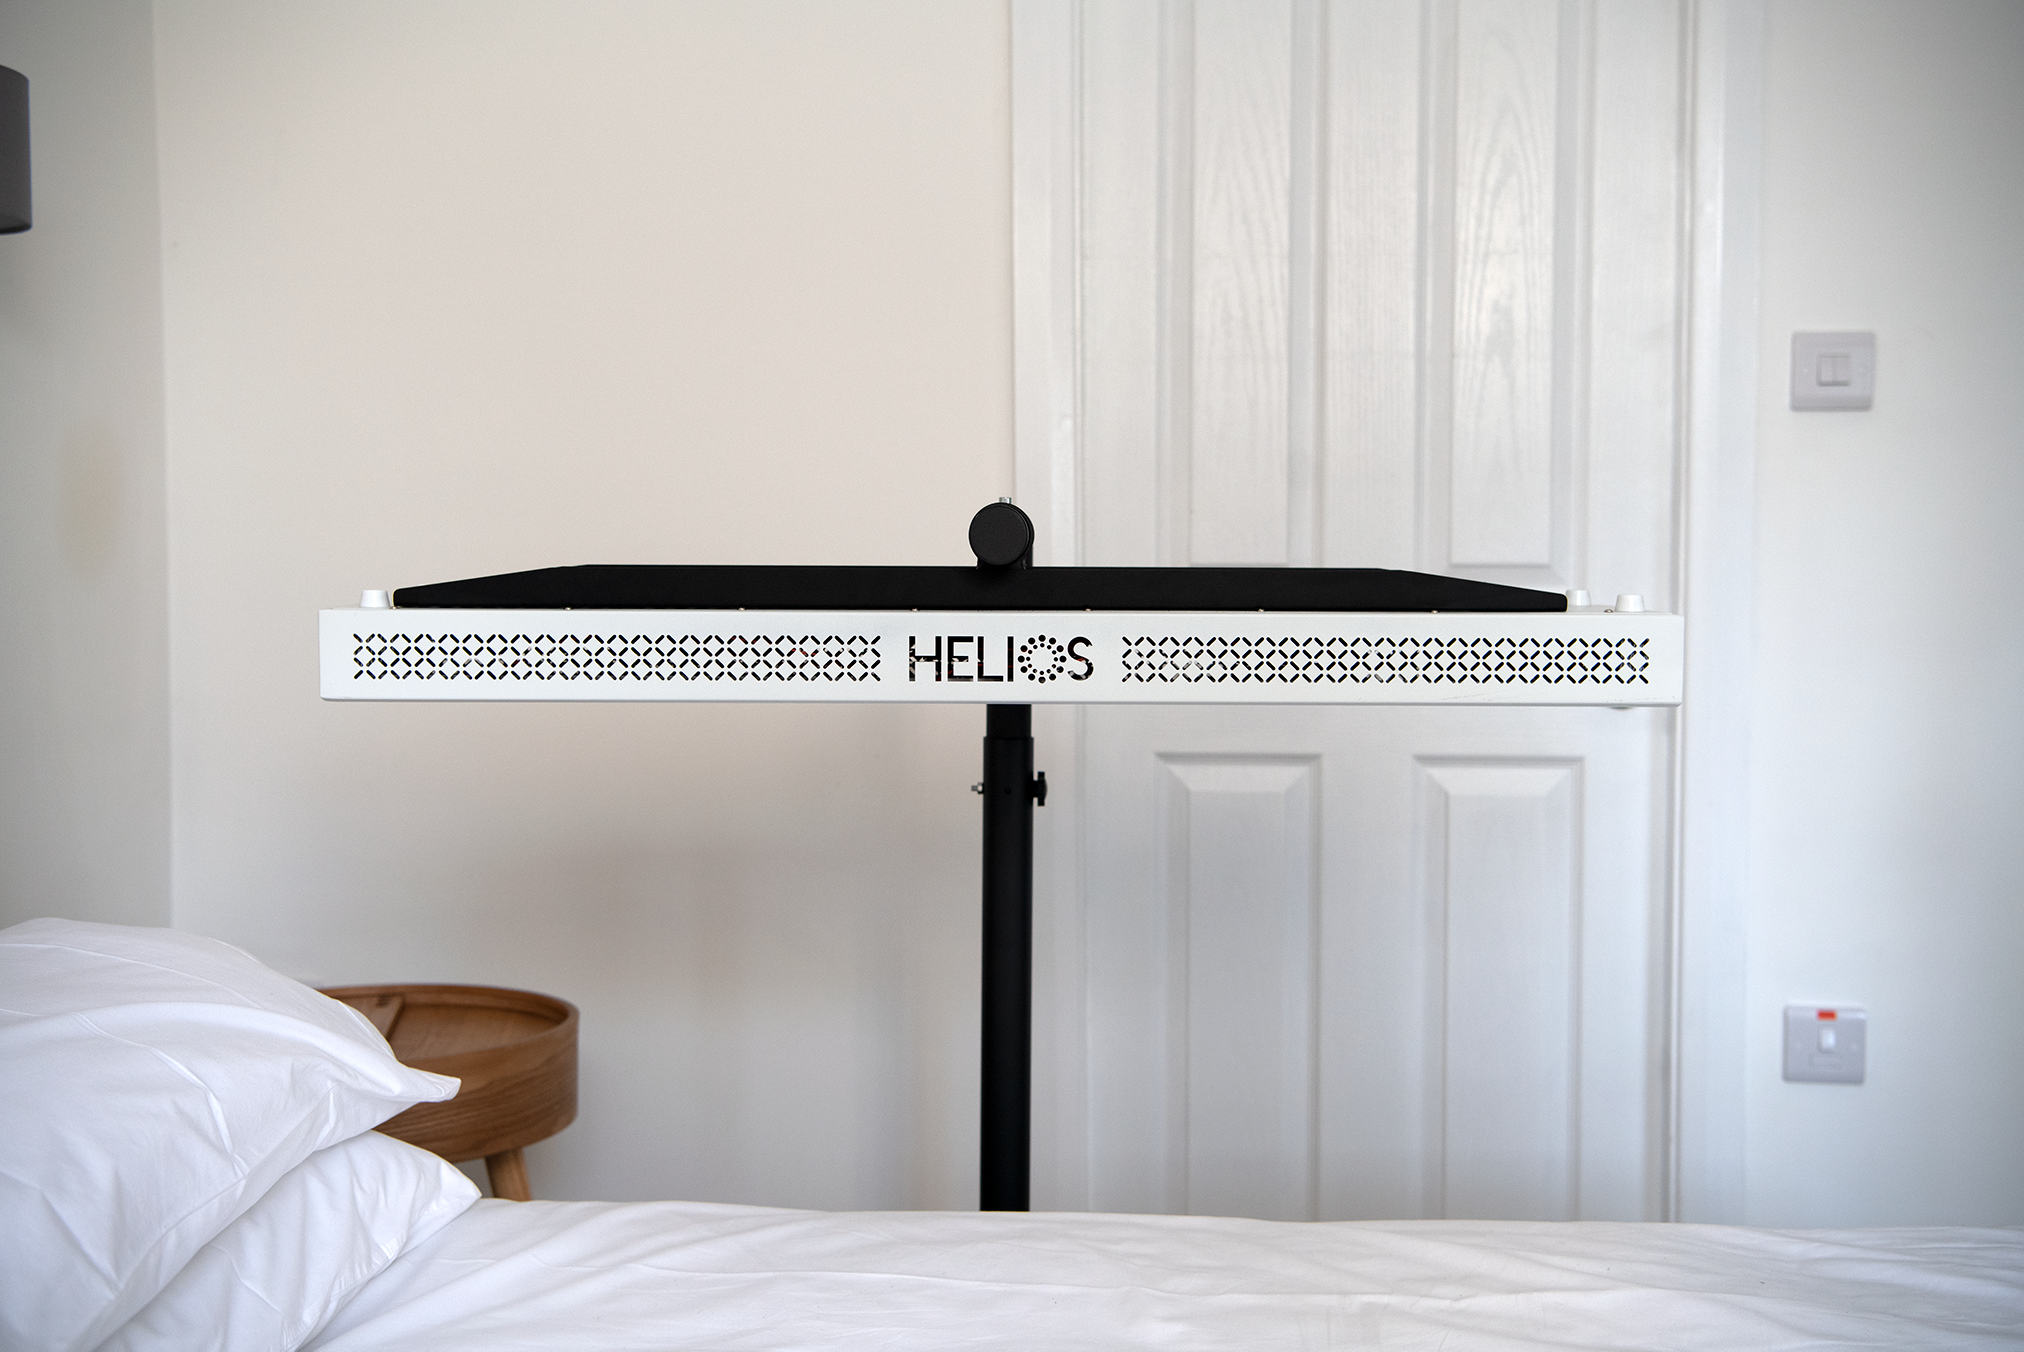 HELIOS 2 SERIES - Red Light Therapy Devices